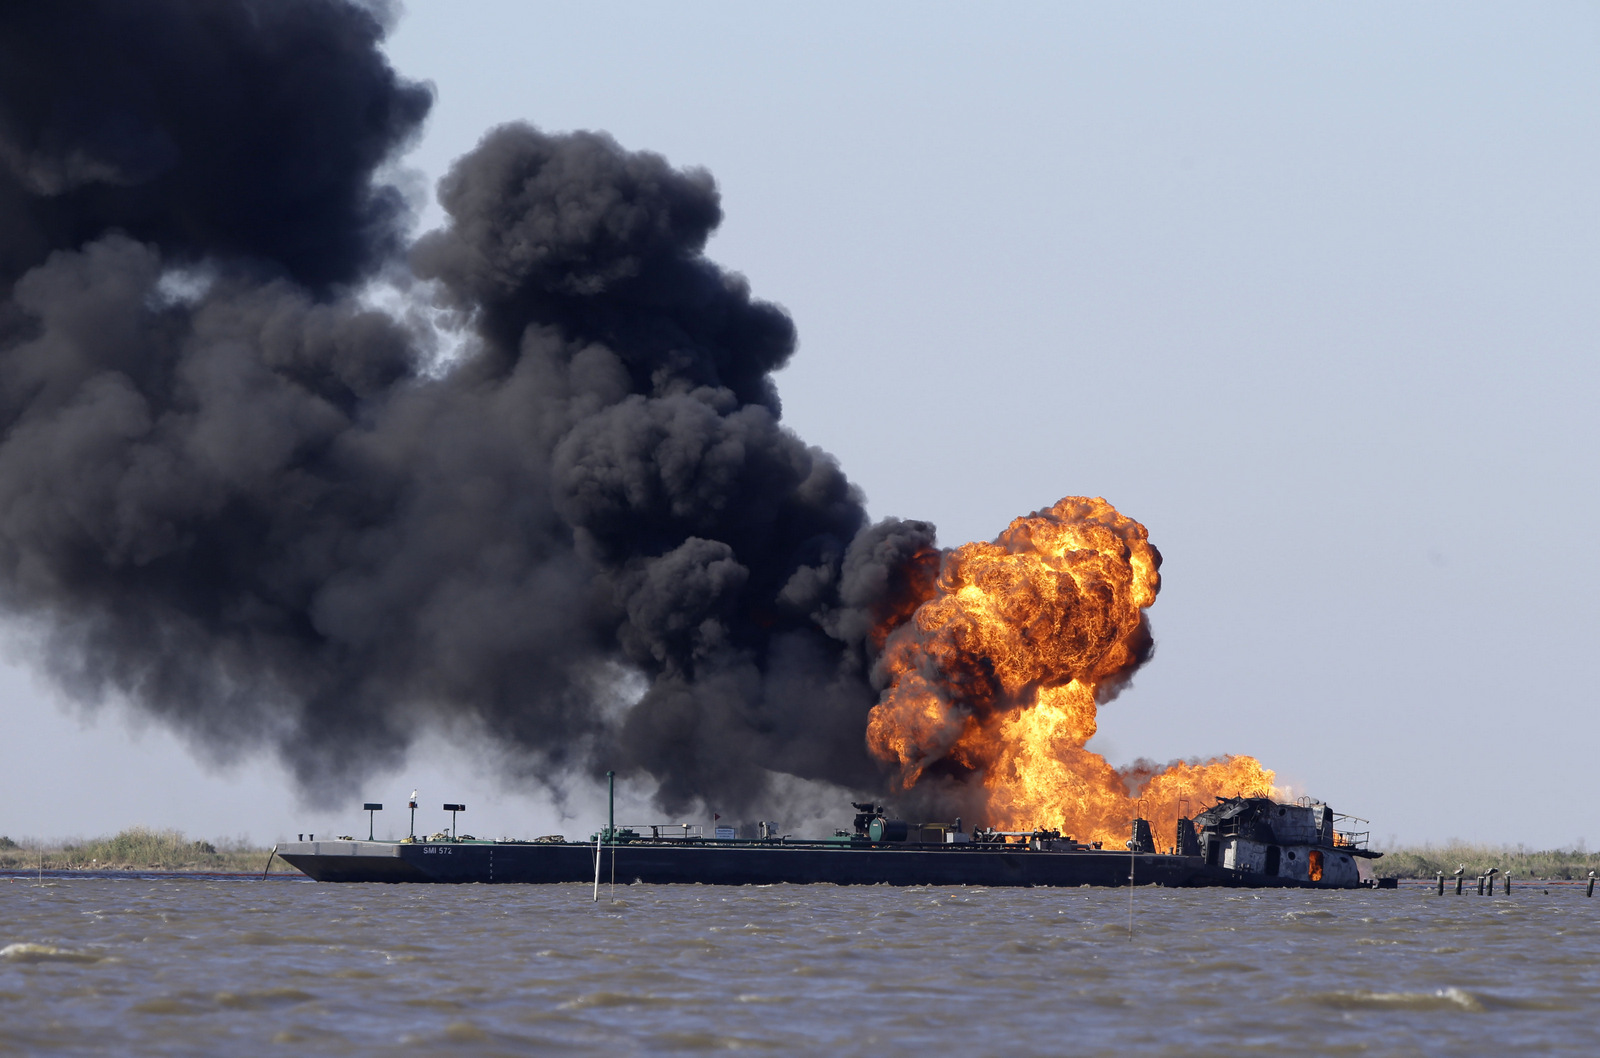 A fire burns after a tugboat and barge hit a gas pipeline in Perot Bay in Lafourche Parish, La., March 13, 2013. (AP/Gerald Herbert)